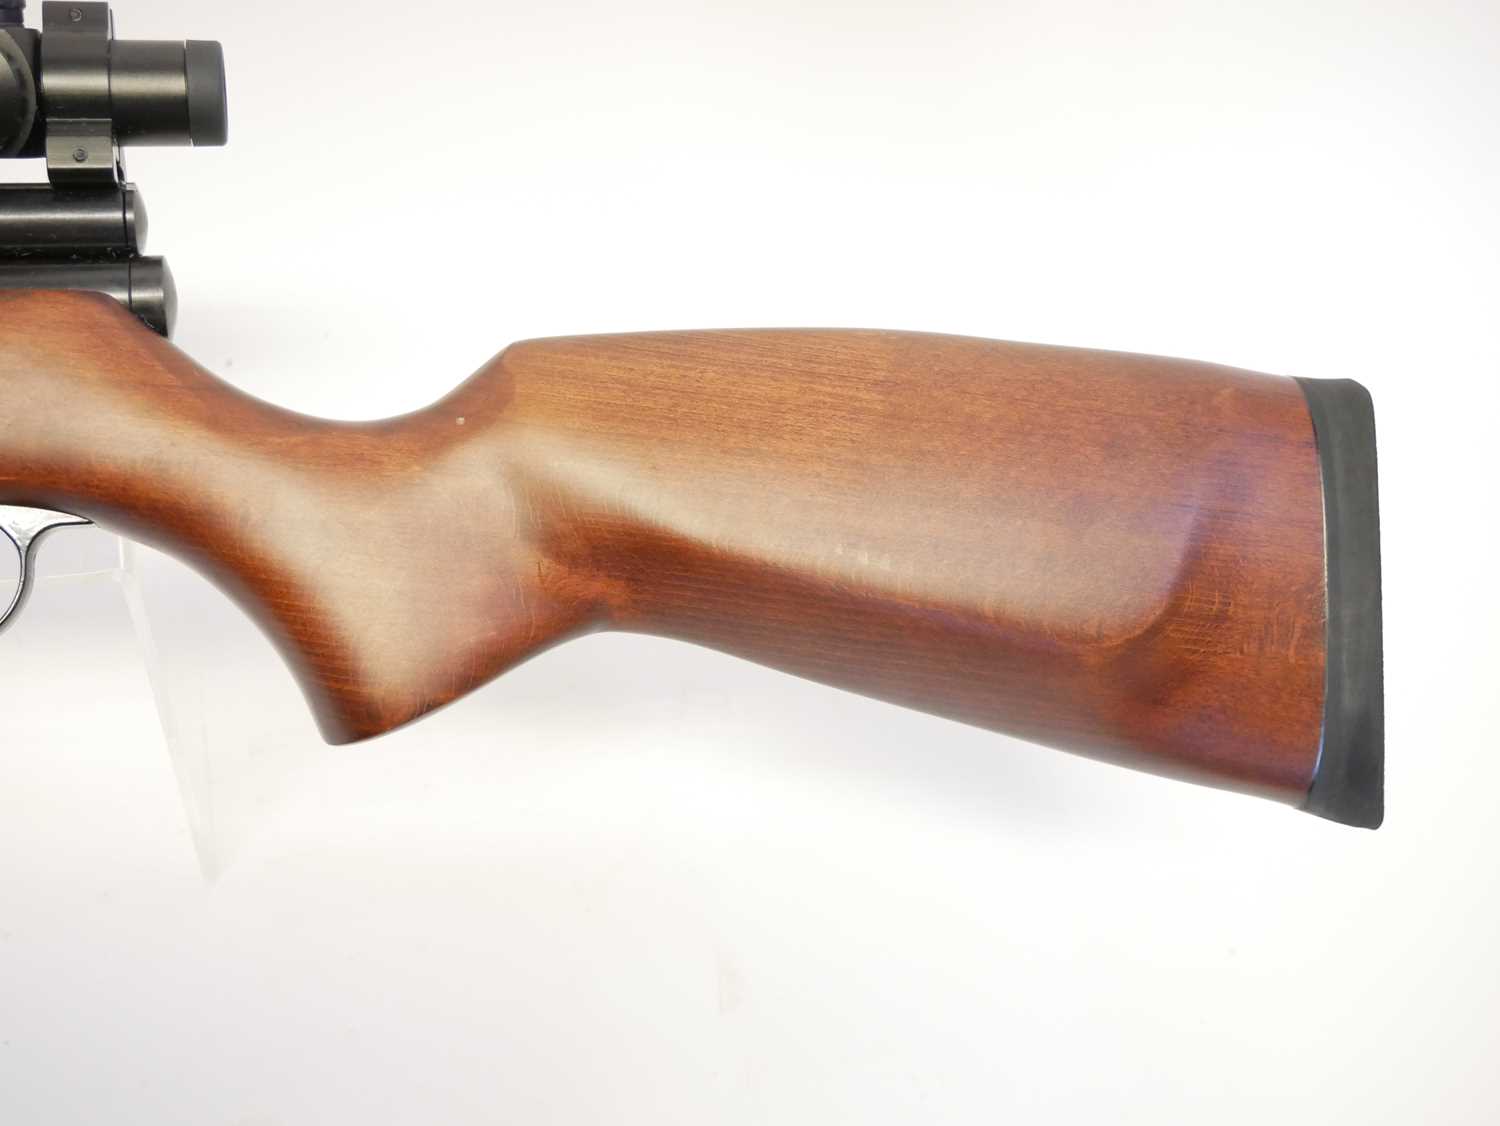 SMK QB78DL .22 CO2 air rifle, 29inch barrel including the fitted moderator, fitted with Hawke scope, - Image 8 of 12